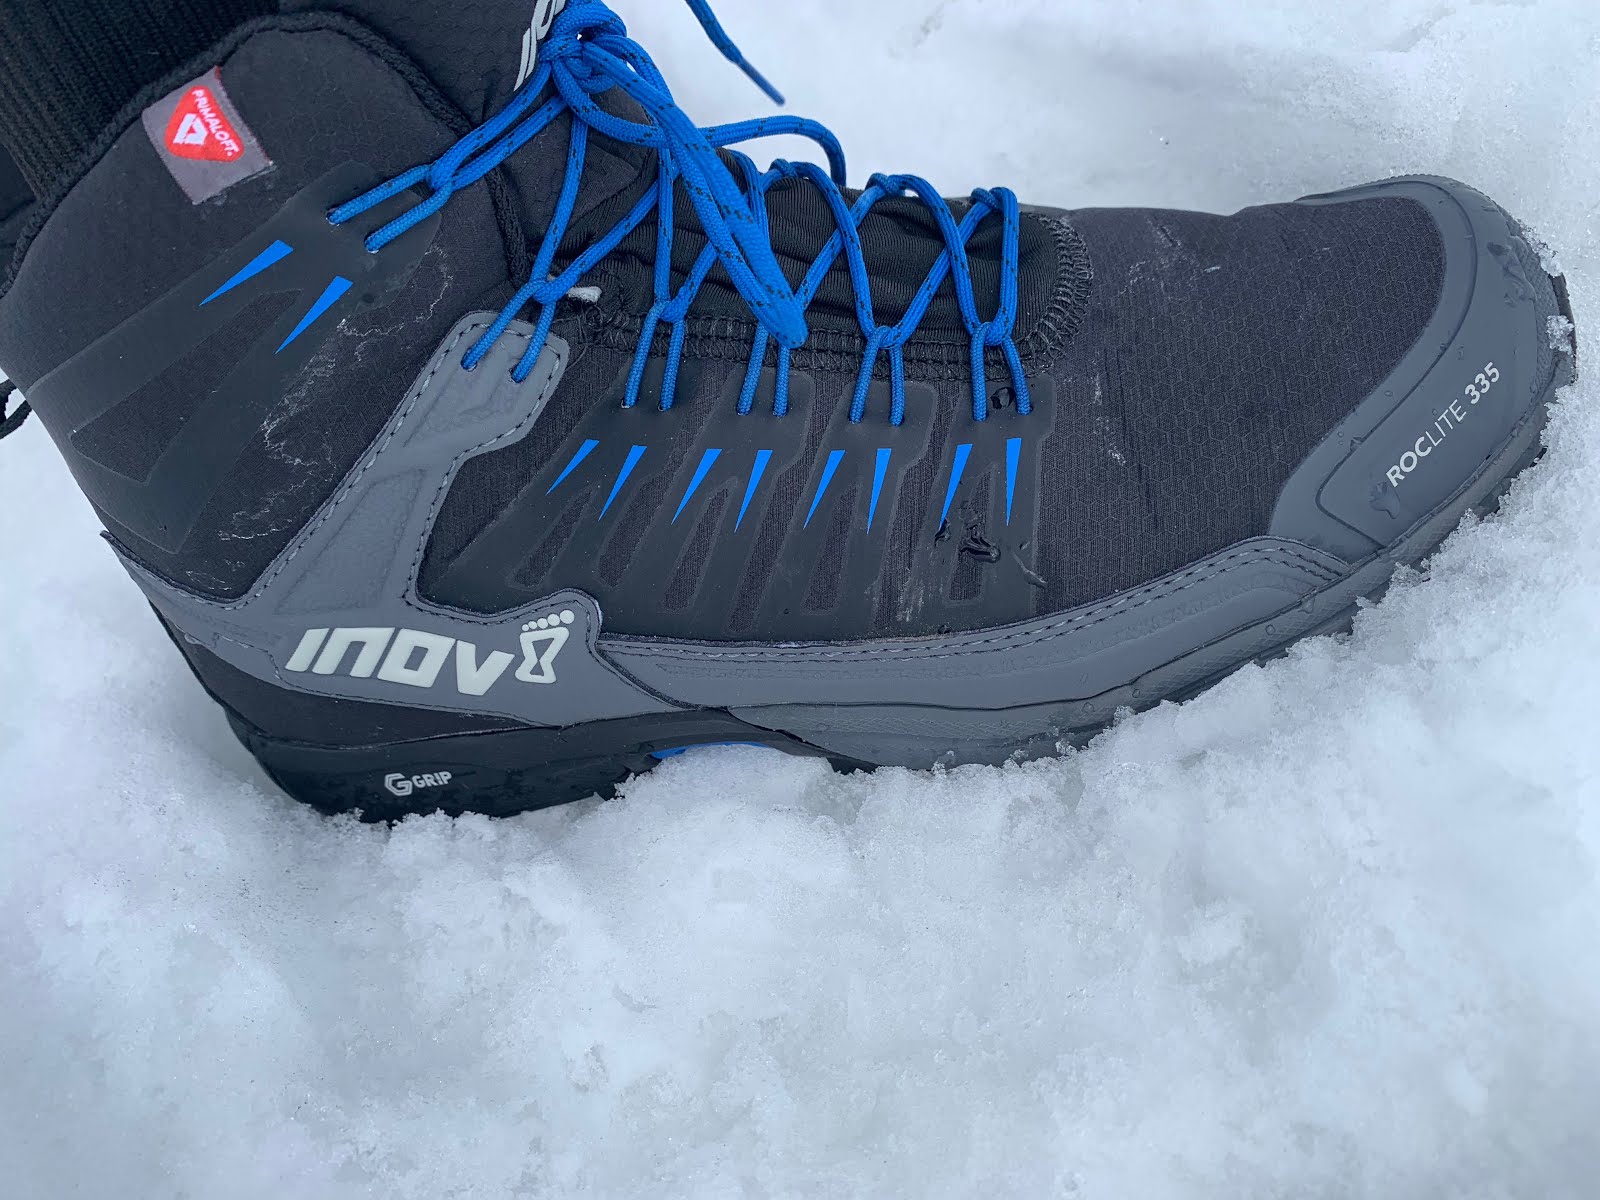 Inov8 Mens Roclite 335 Trail Running Boots Black Sports Outdoors Water Resistant 